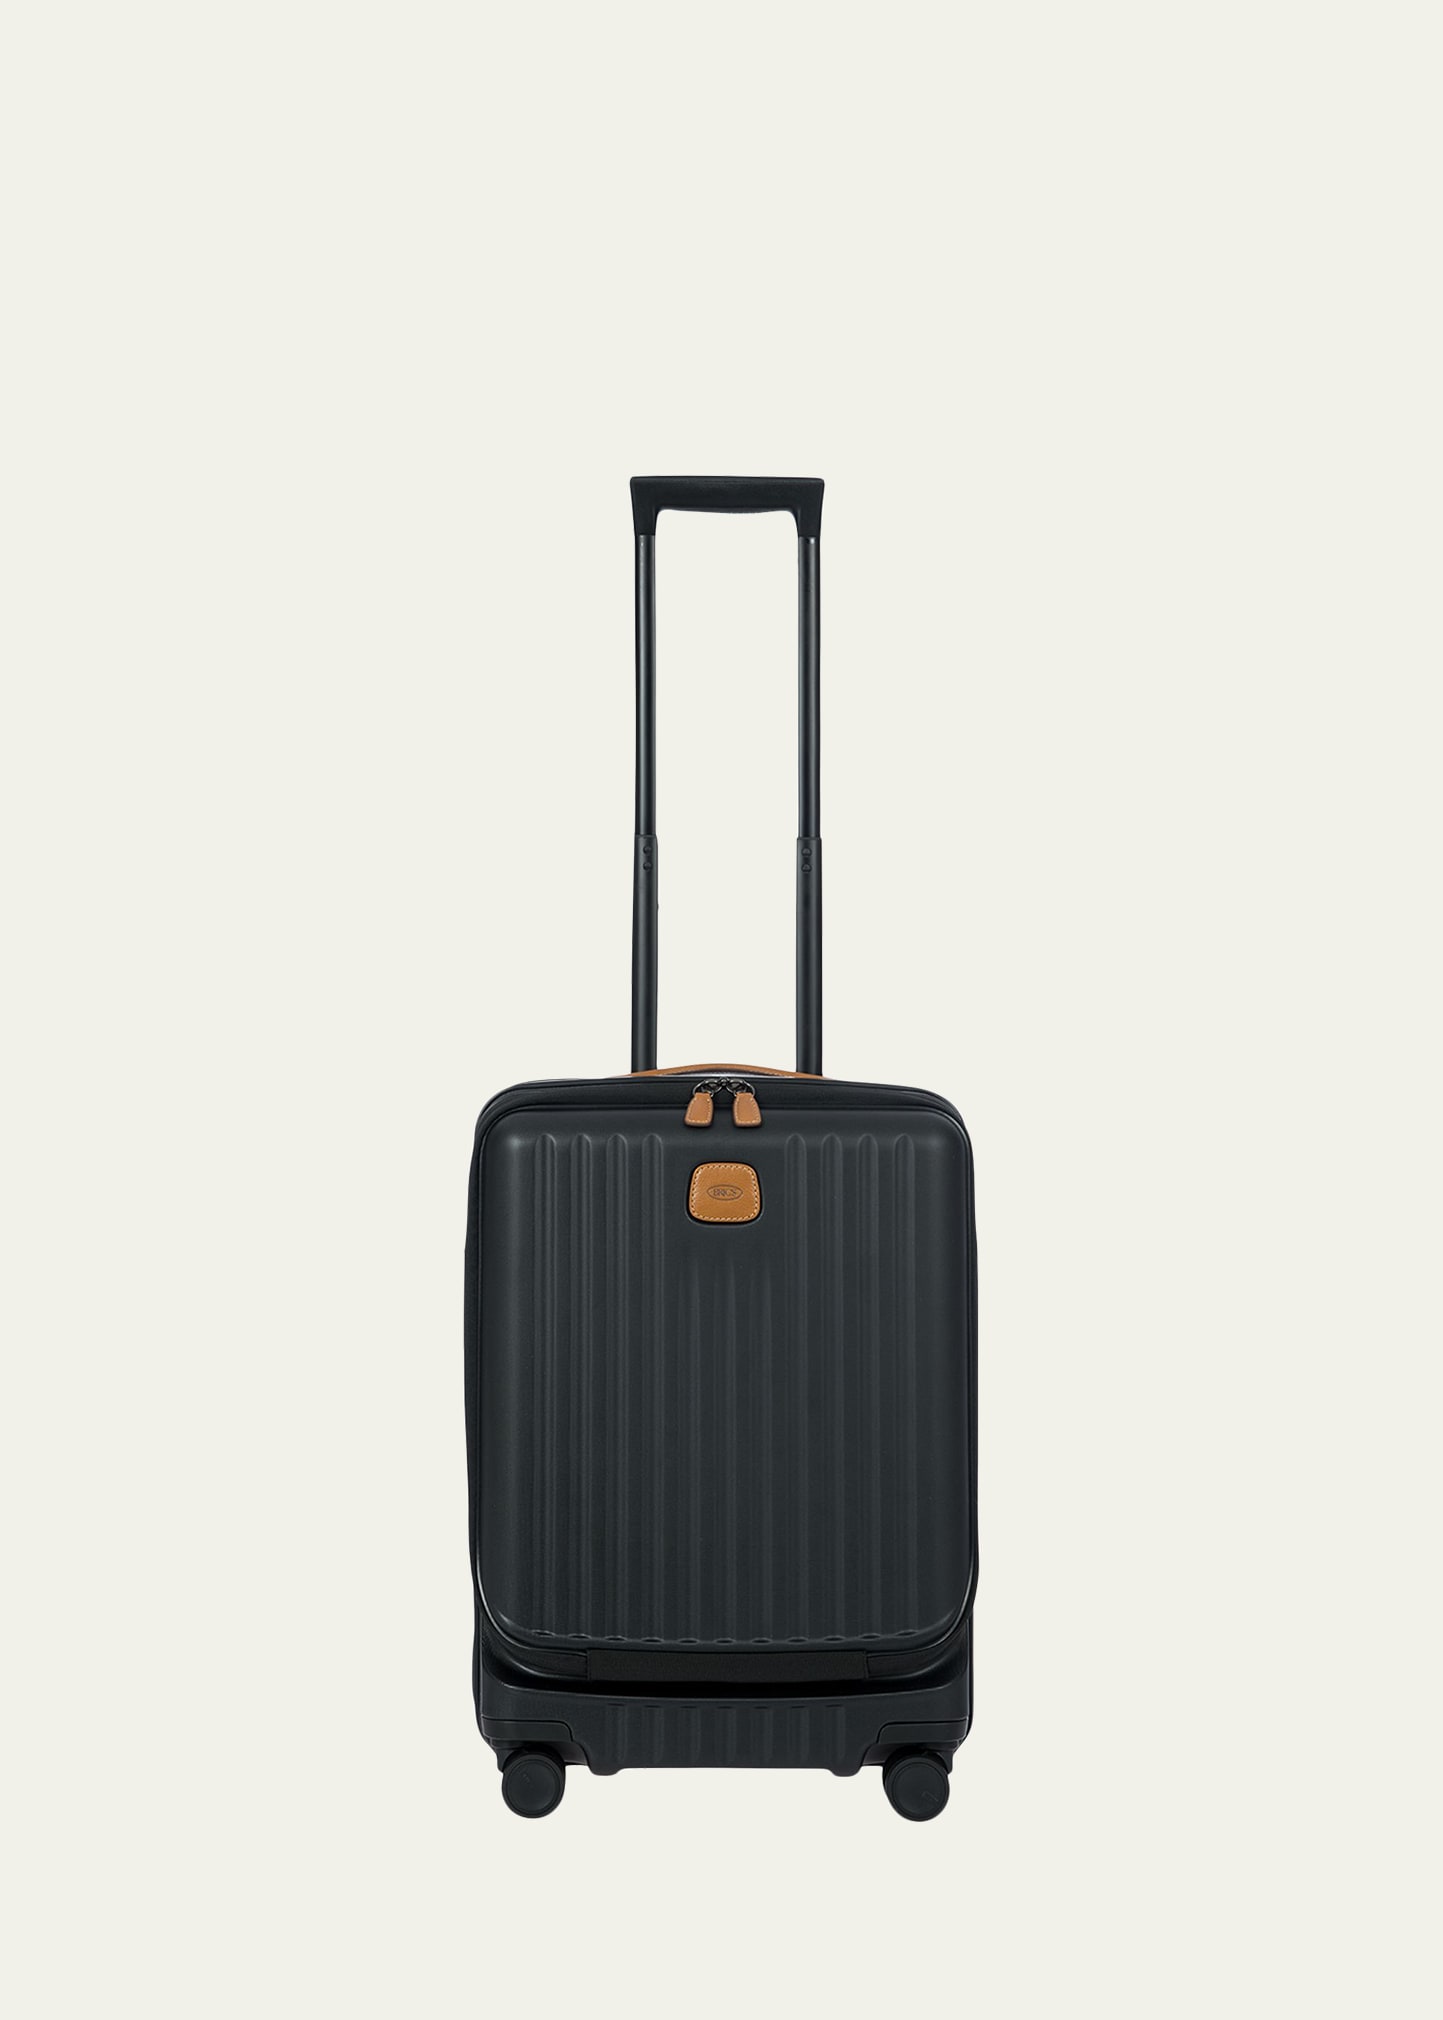 Capri 2.0 21" Spinner Luggage with Pocket